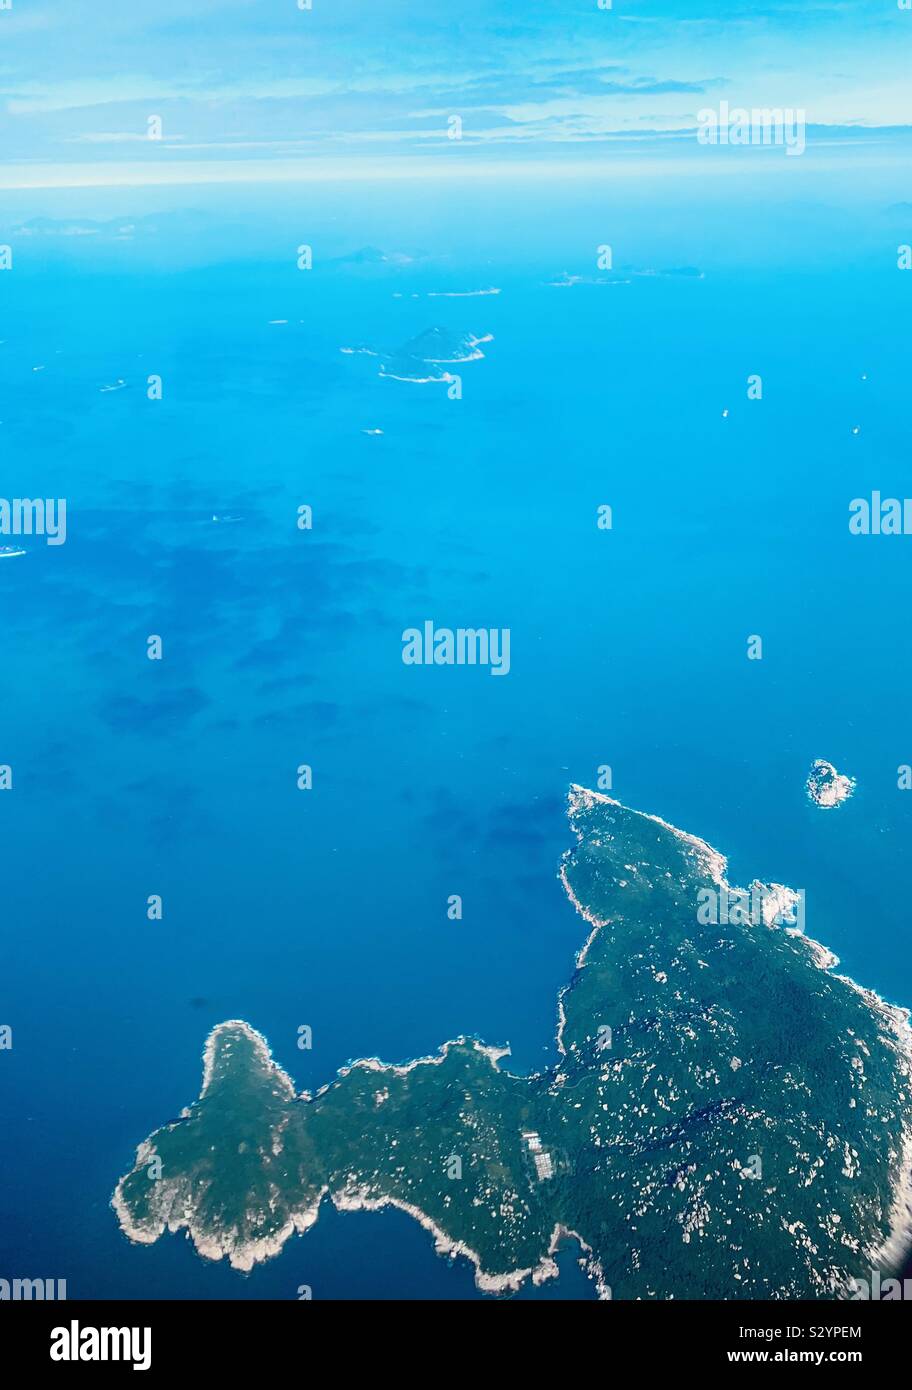 Aerial view of one of Hong Kong’s outer islands. Stock Photo